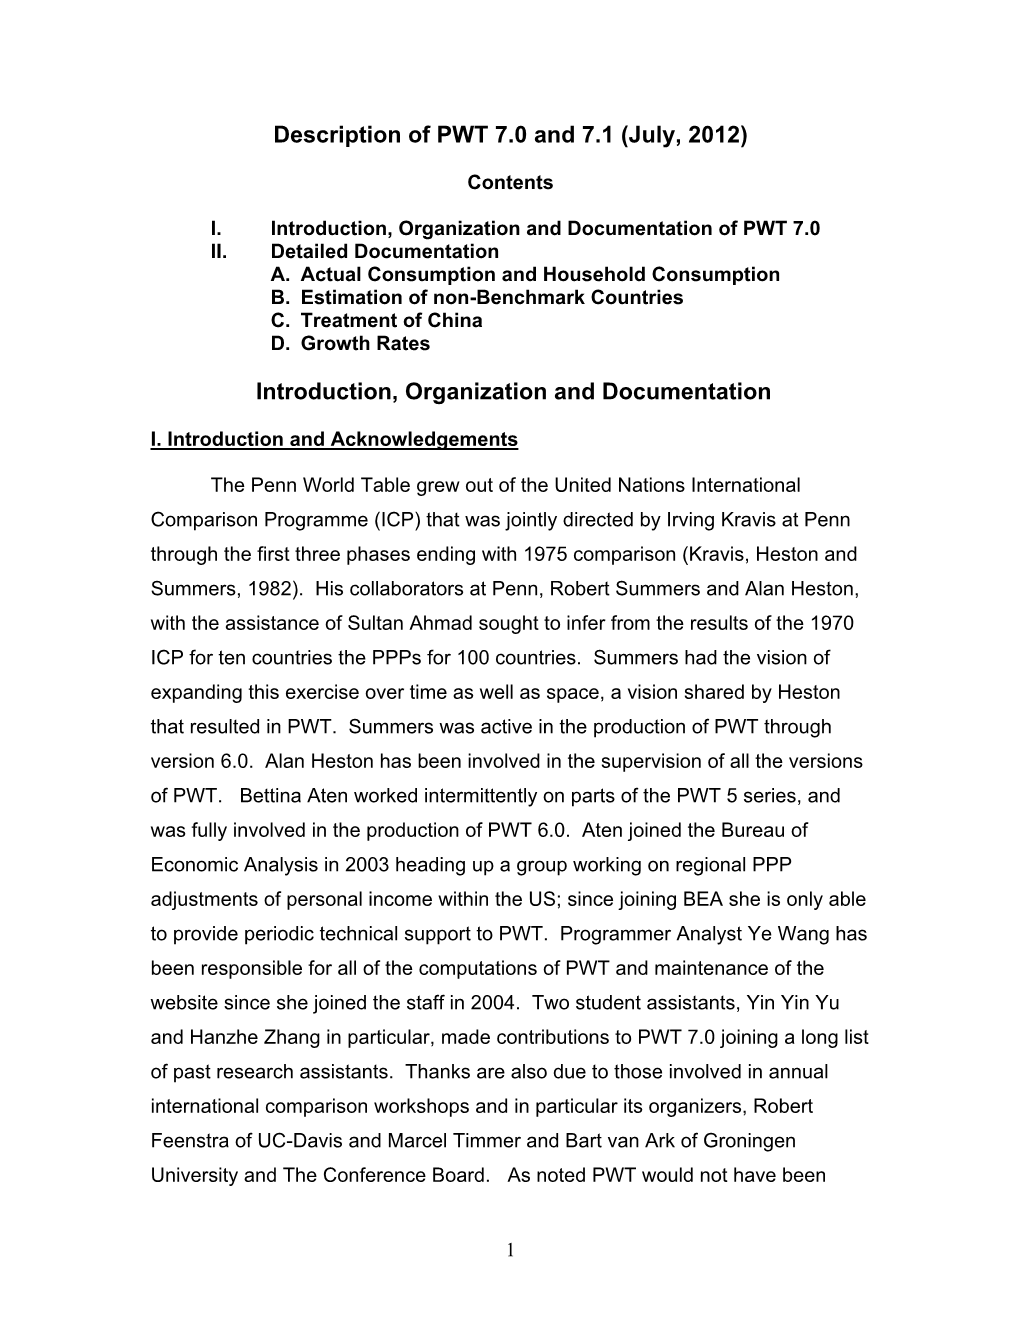 Description of PWT 7.0 and 7.1 (July, 2012) Introduction, Organization